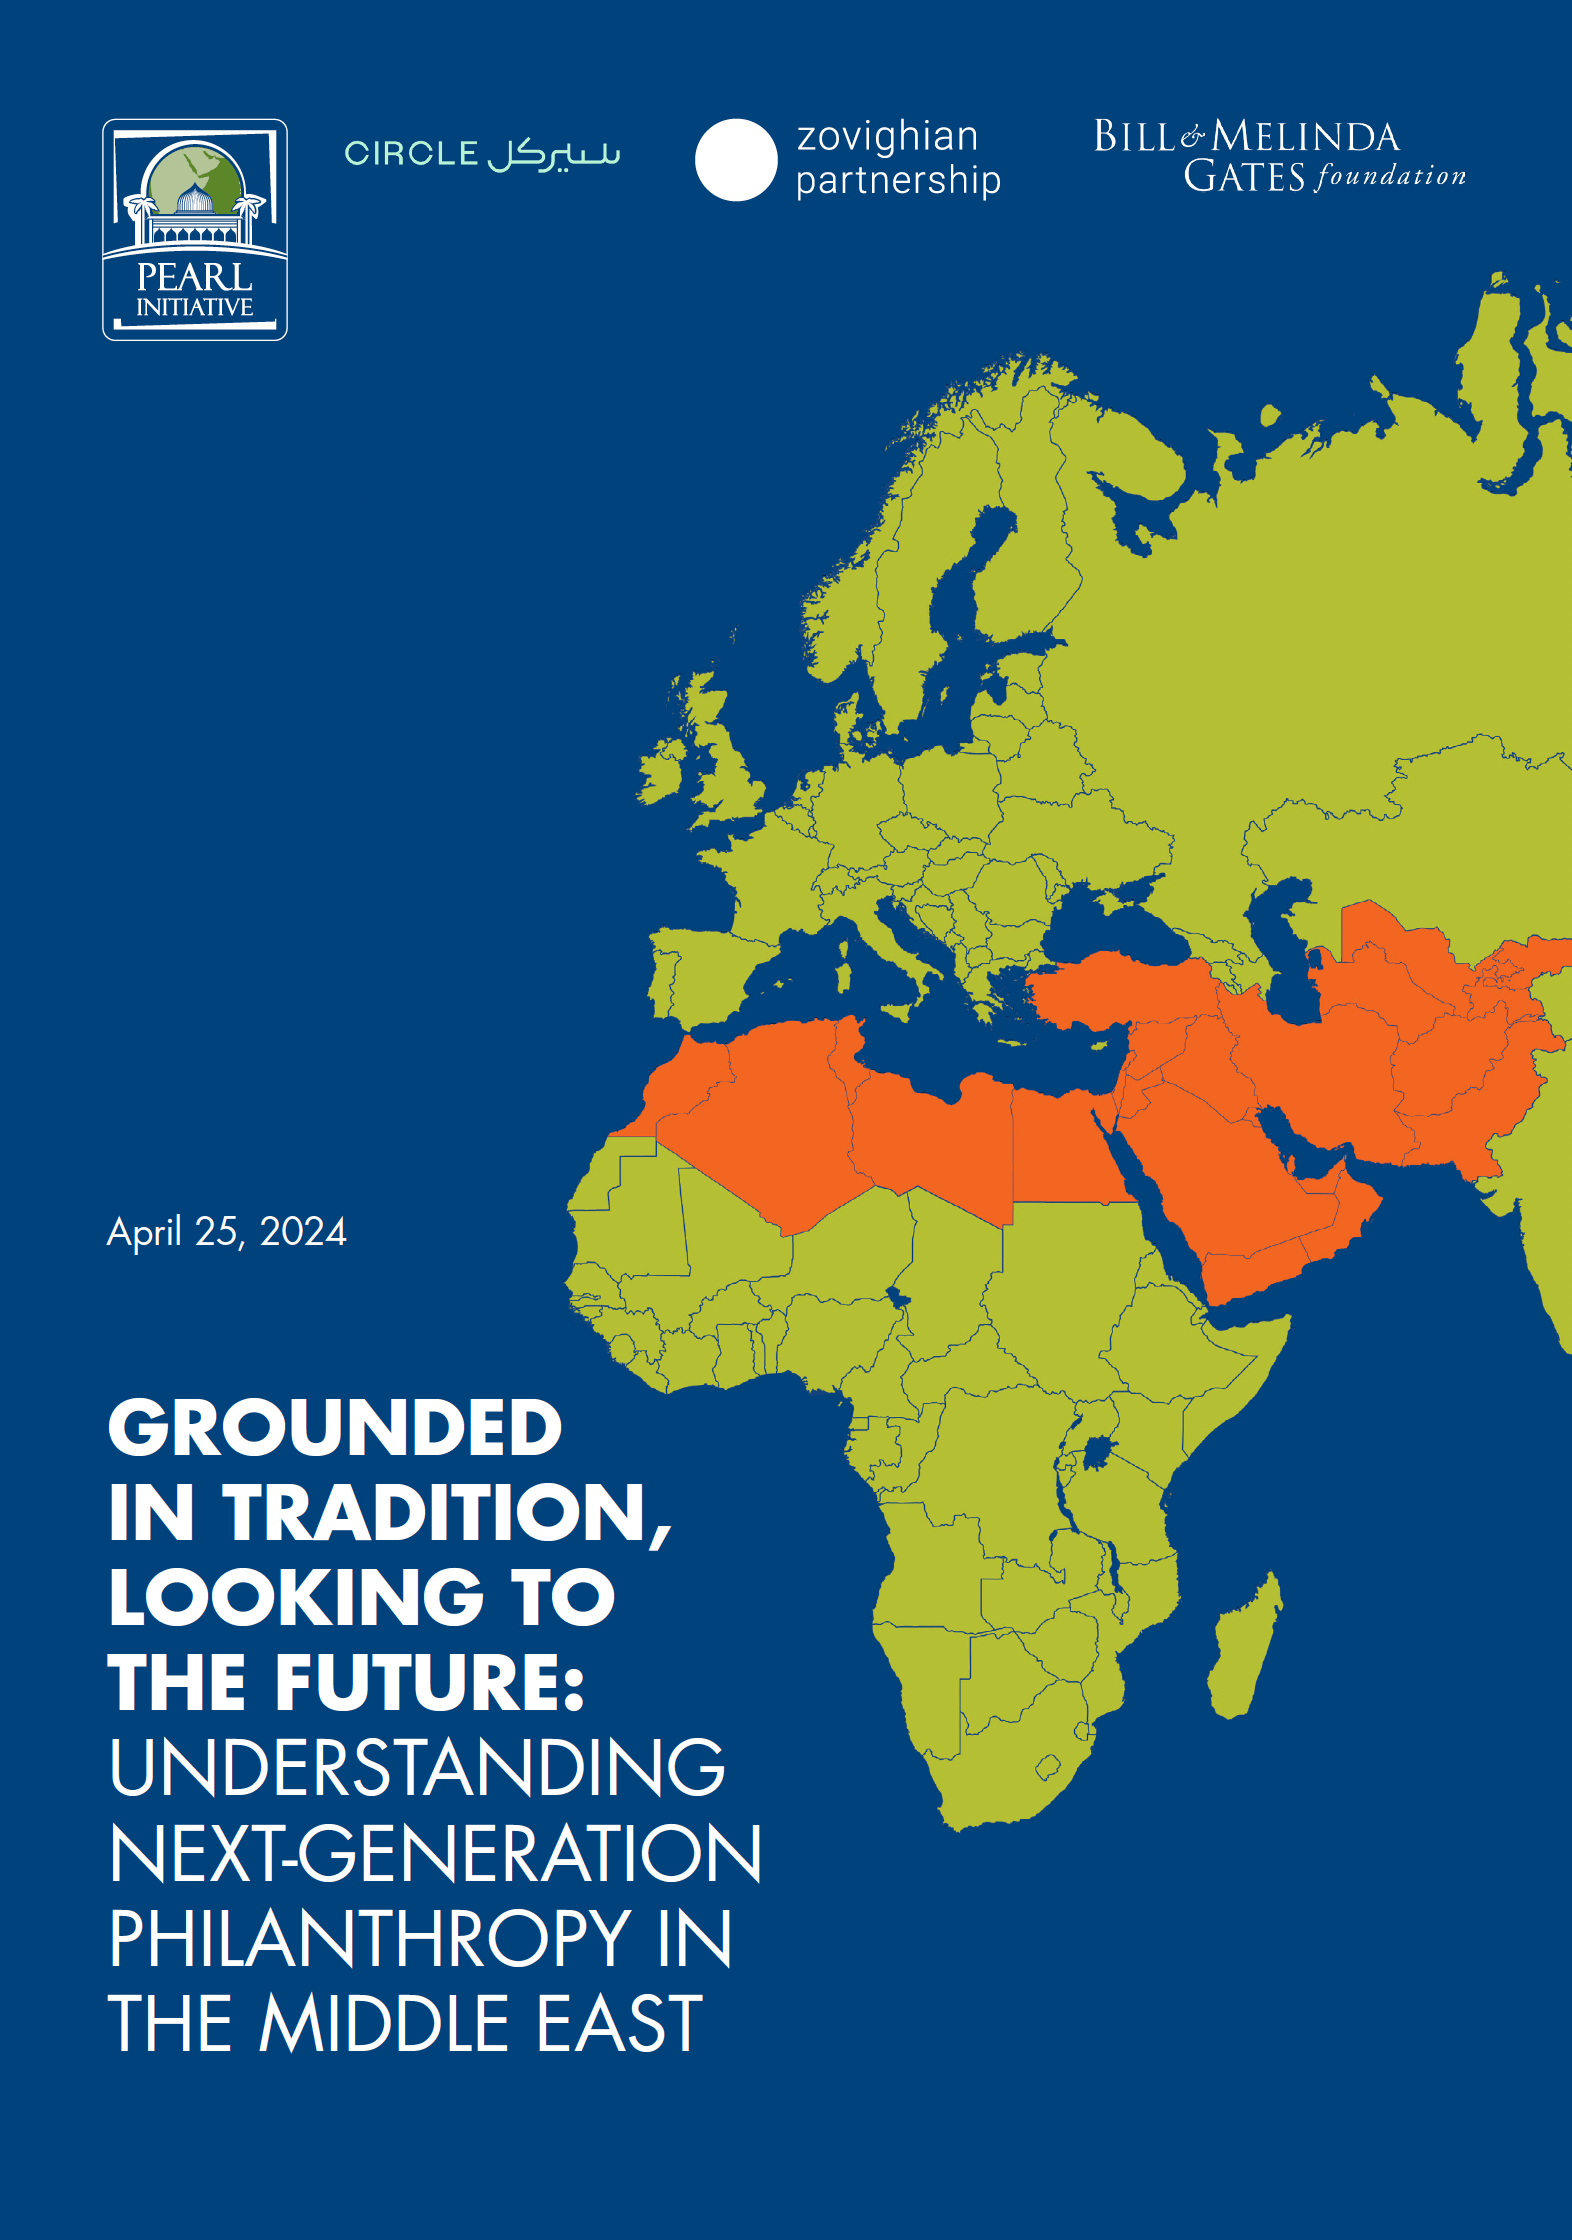 A report titled Grounded in tradition looking to the future: Understanding next-generation philanthropy in the Middle East 